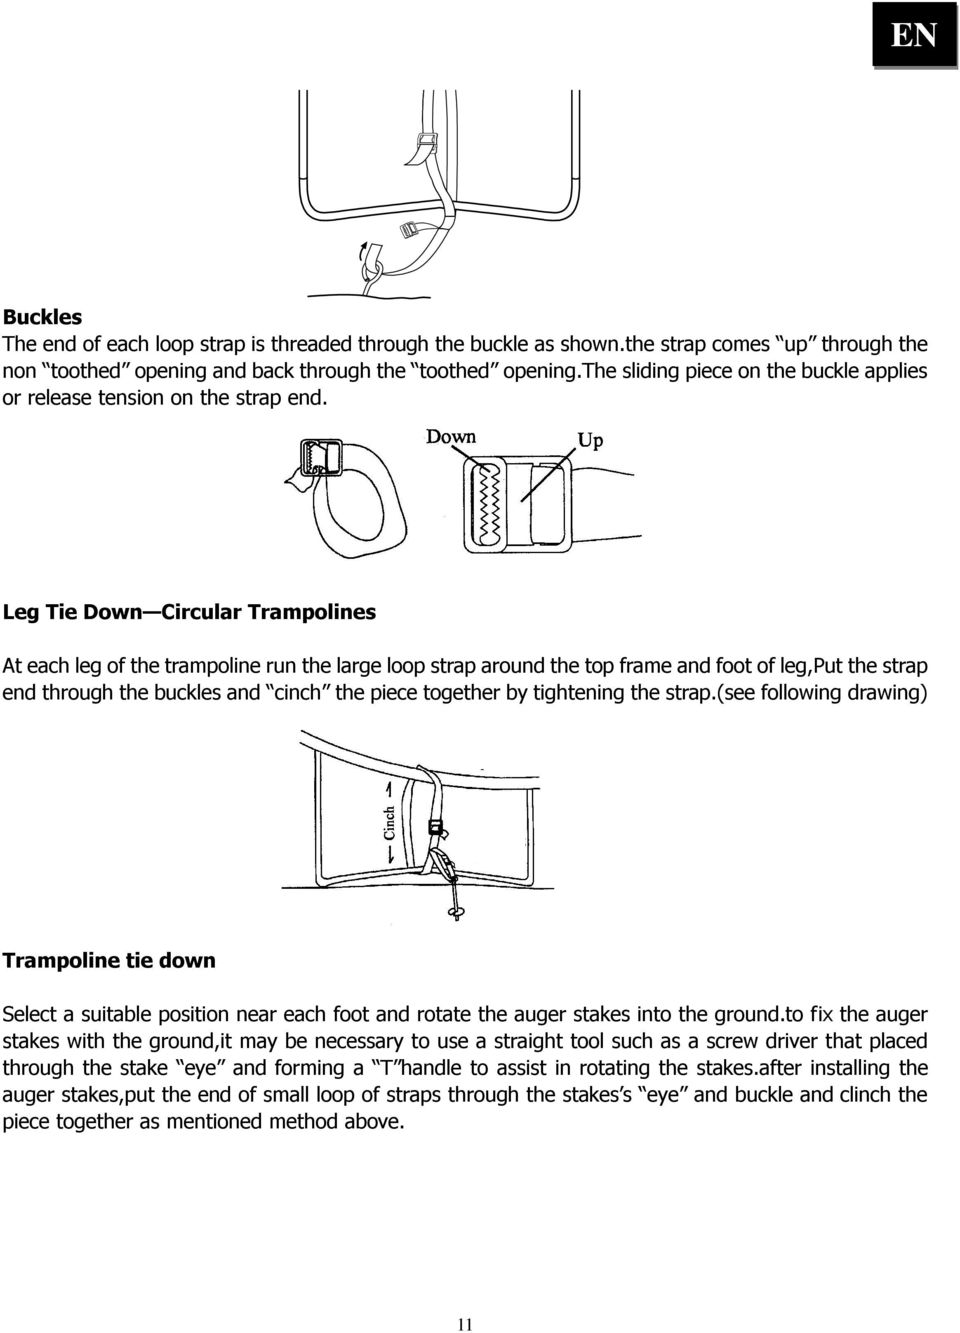 Leg Tie Down Circular Trampolines At each leg of the trampoline run the large loop strap around the top frame and foot of leg,put the strap end through the buckles and cinch the piece together by